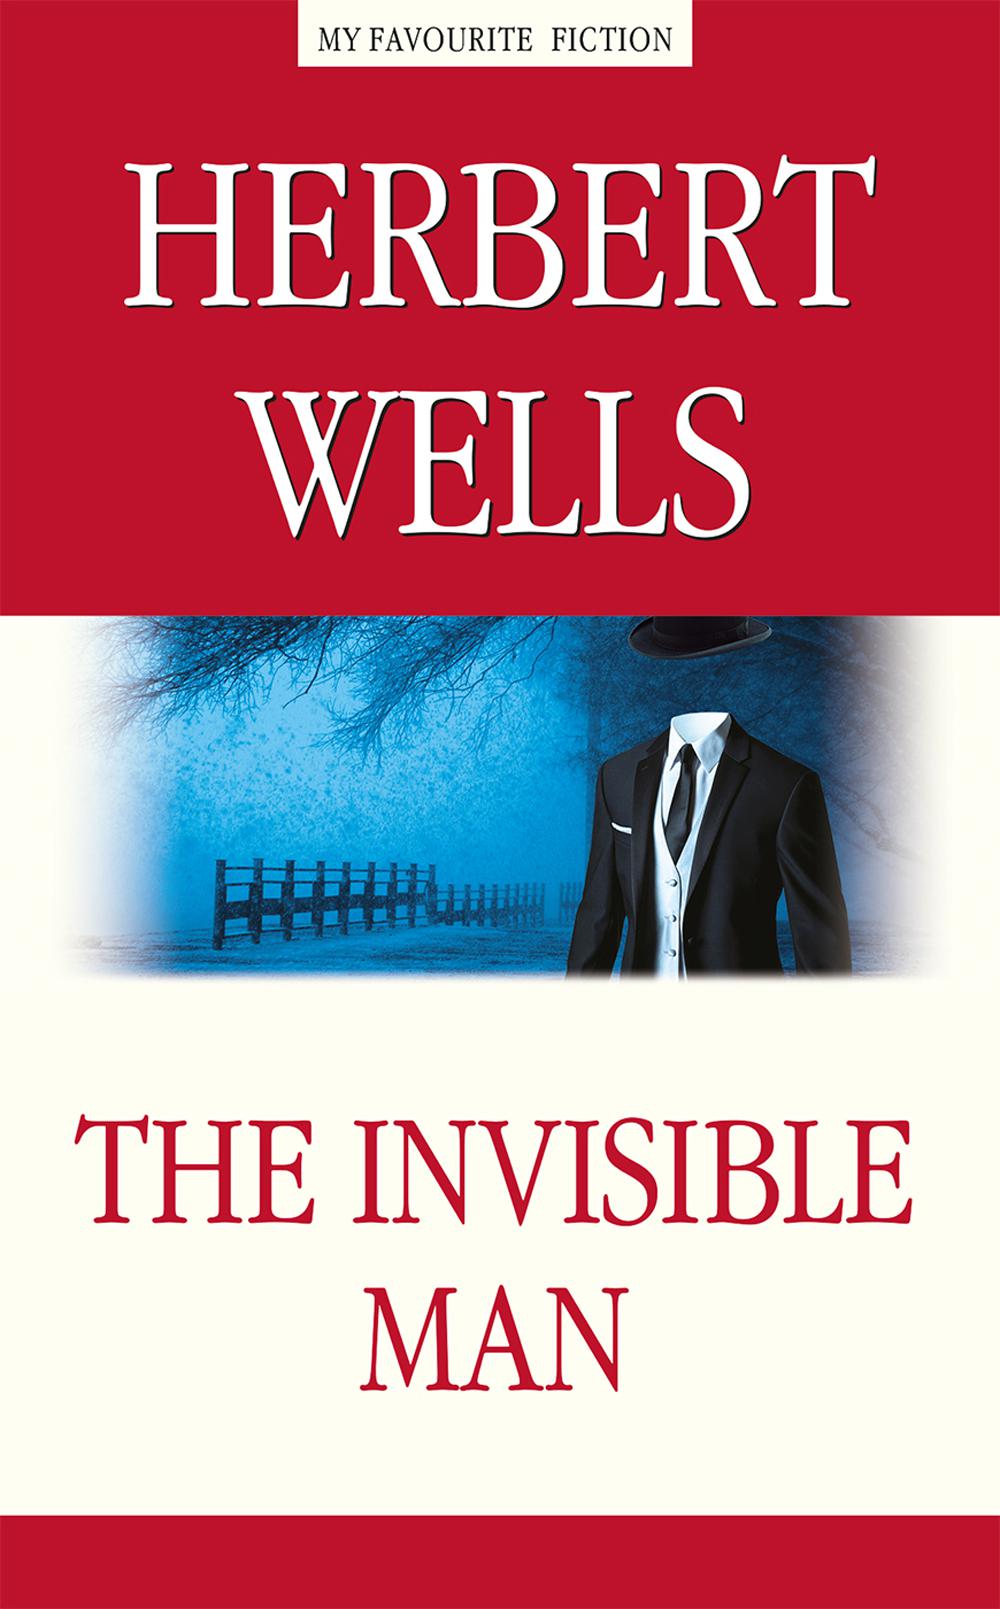  . - (The Invisible Man).    .  My Favourite Fiction